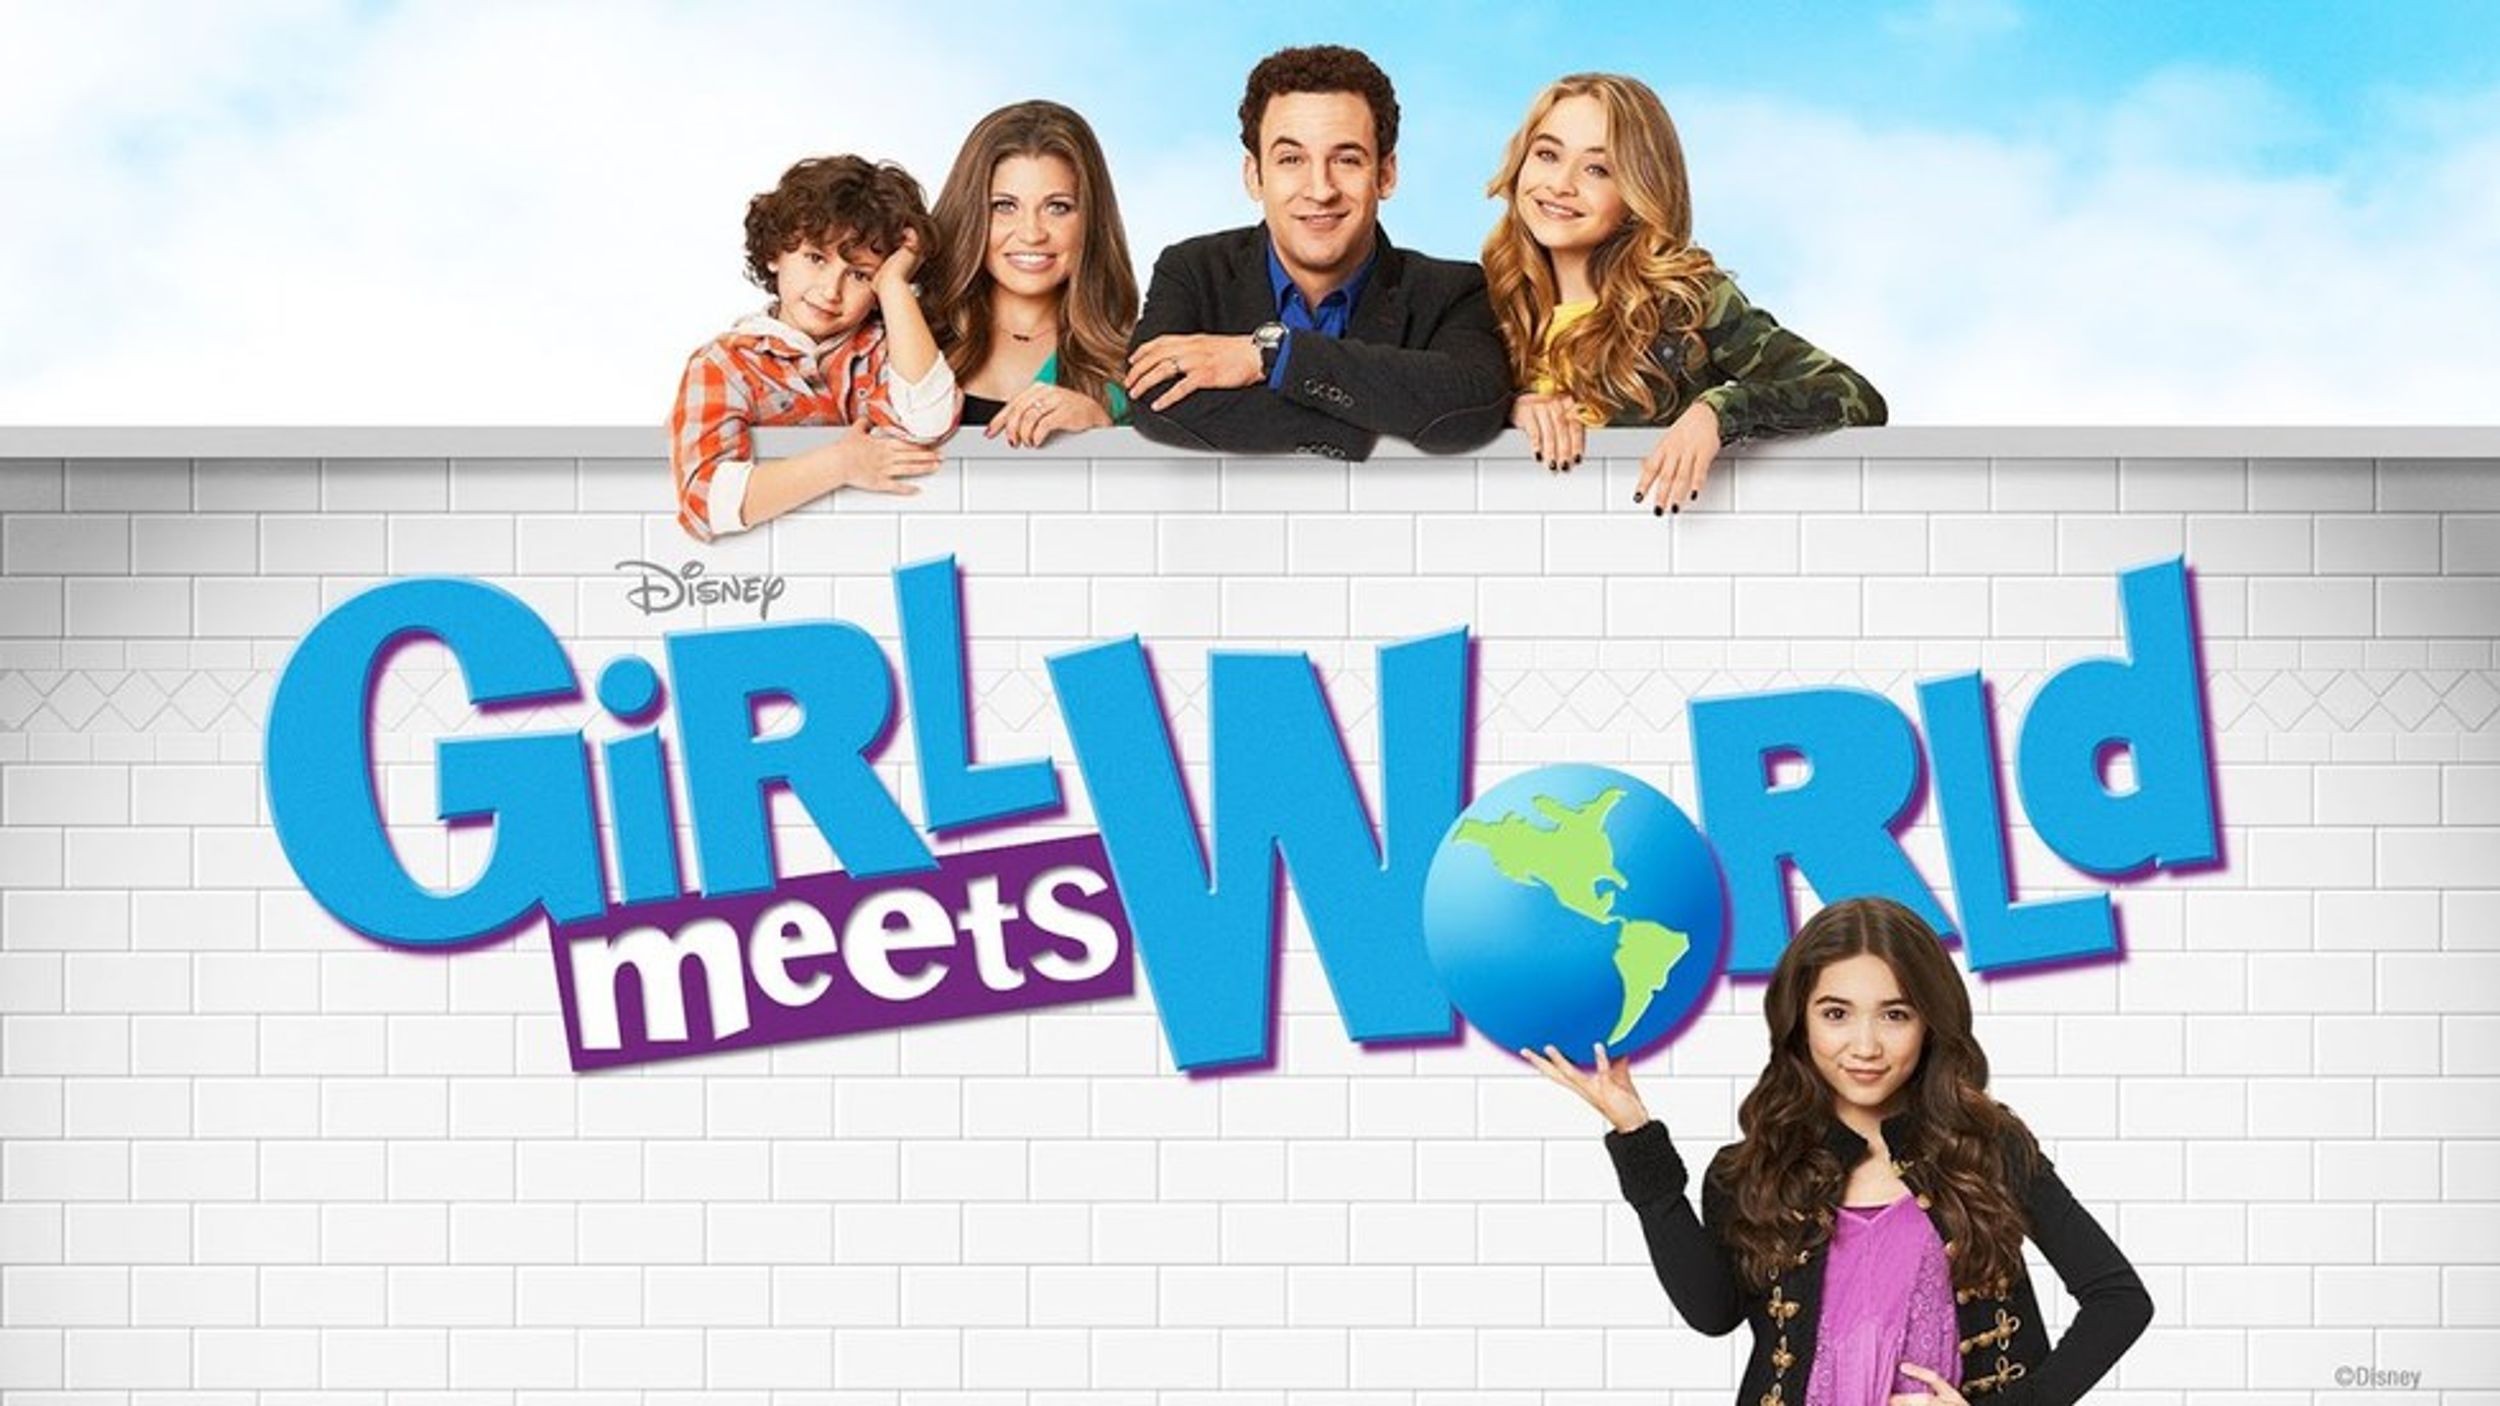 A Goodbye To ‘Girl Meets World’